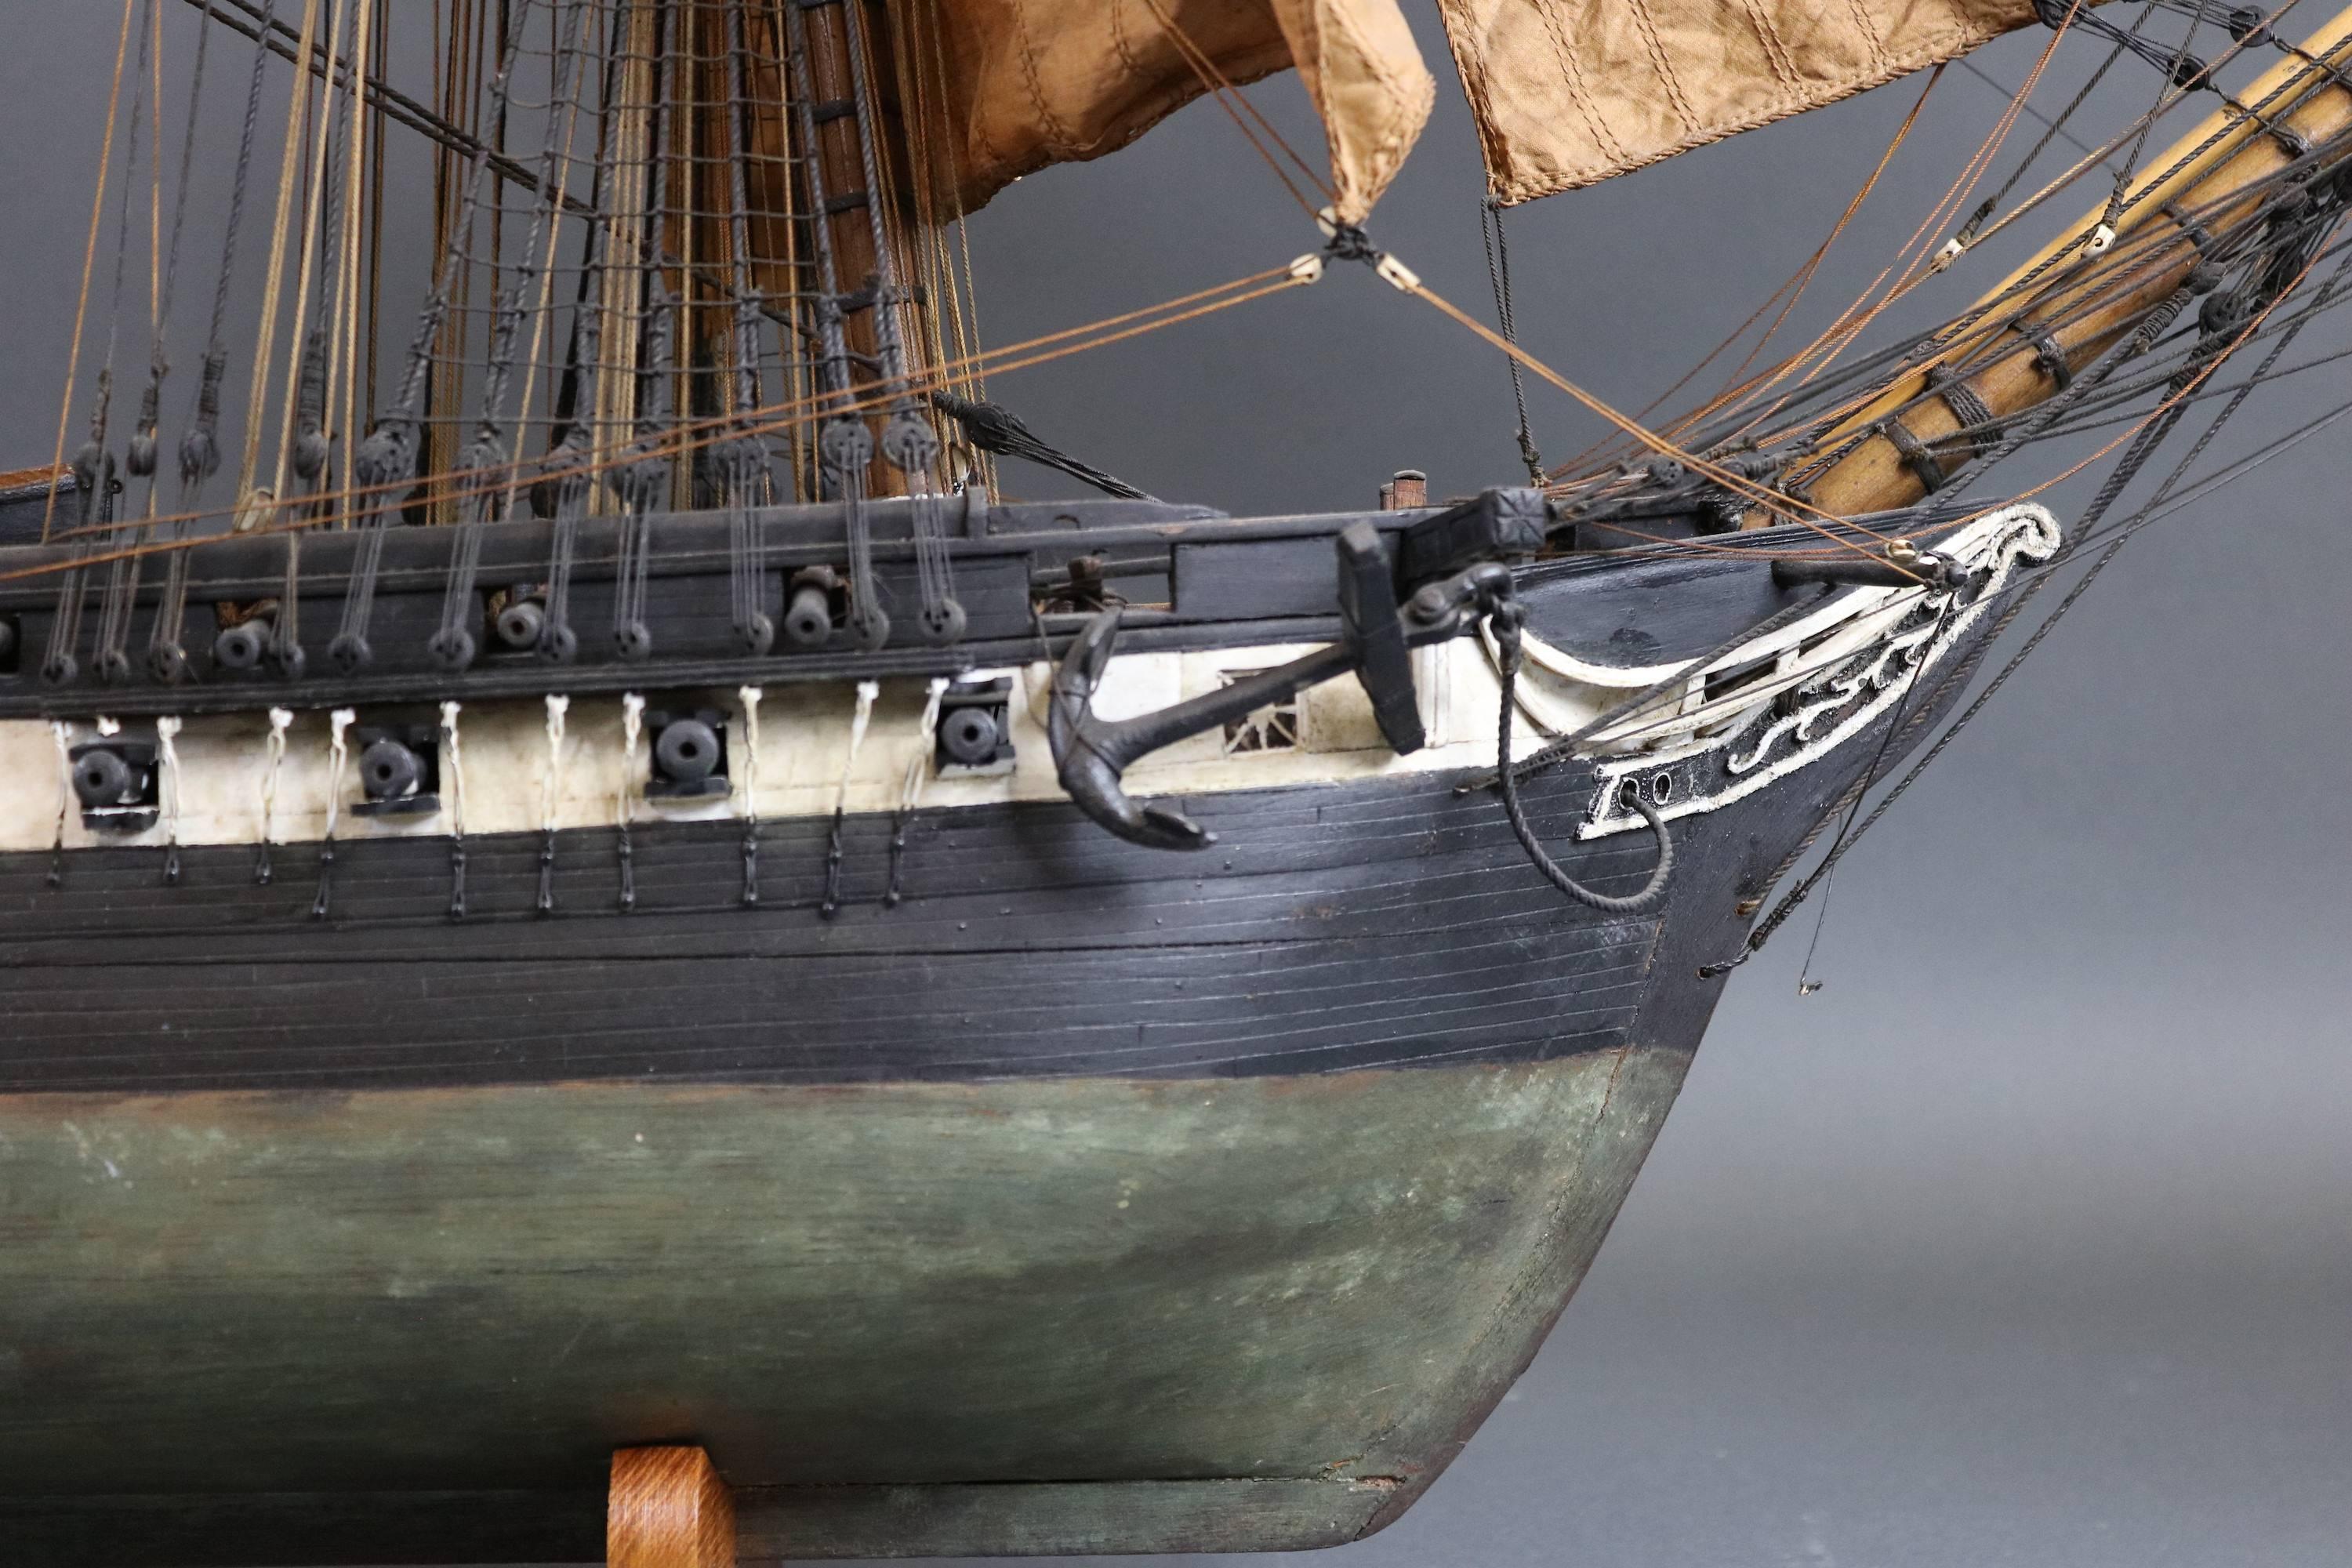 Exquisite antique model of the American frigate USS constitution. Fine 19th century model, rigged with a full suit of sails. Original flag that is showing its age. With scribed deck that carries wheeled carriages. The hollowed hull has built up